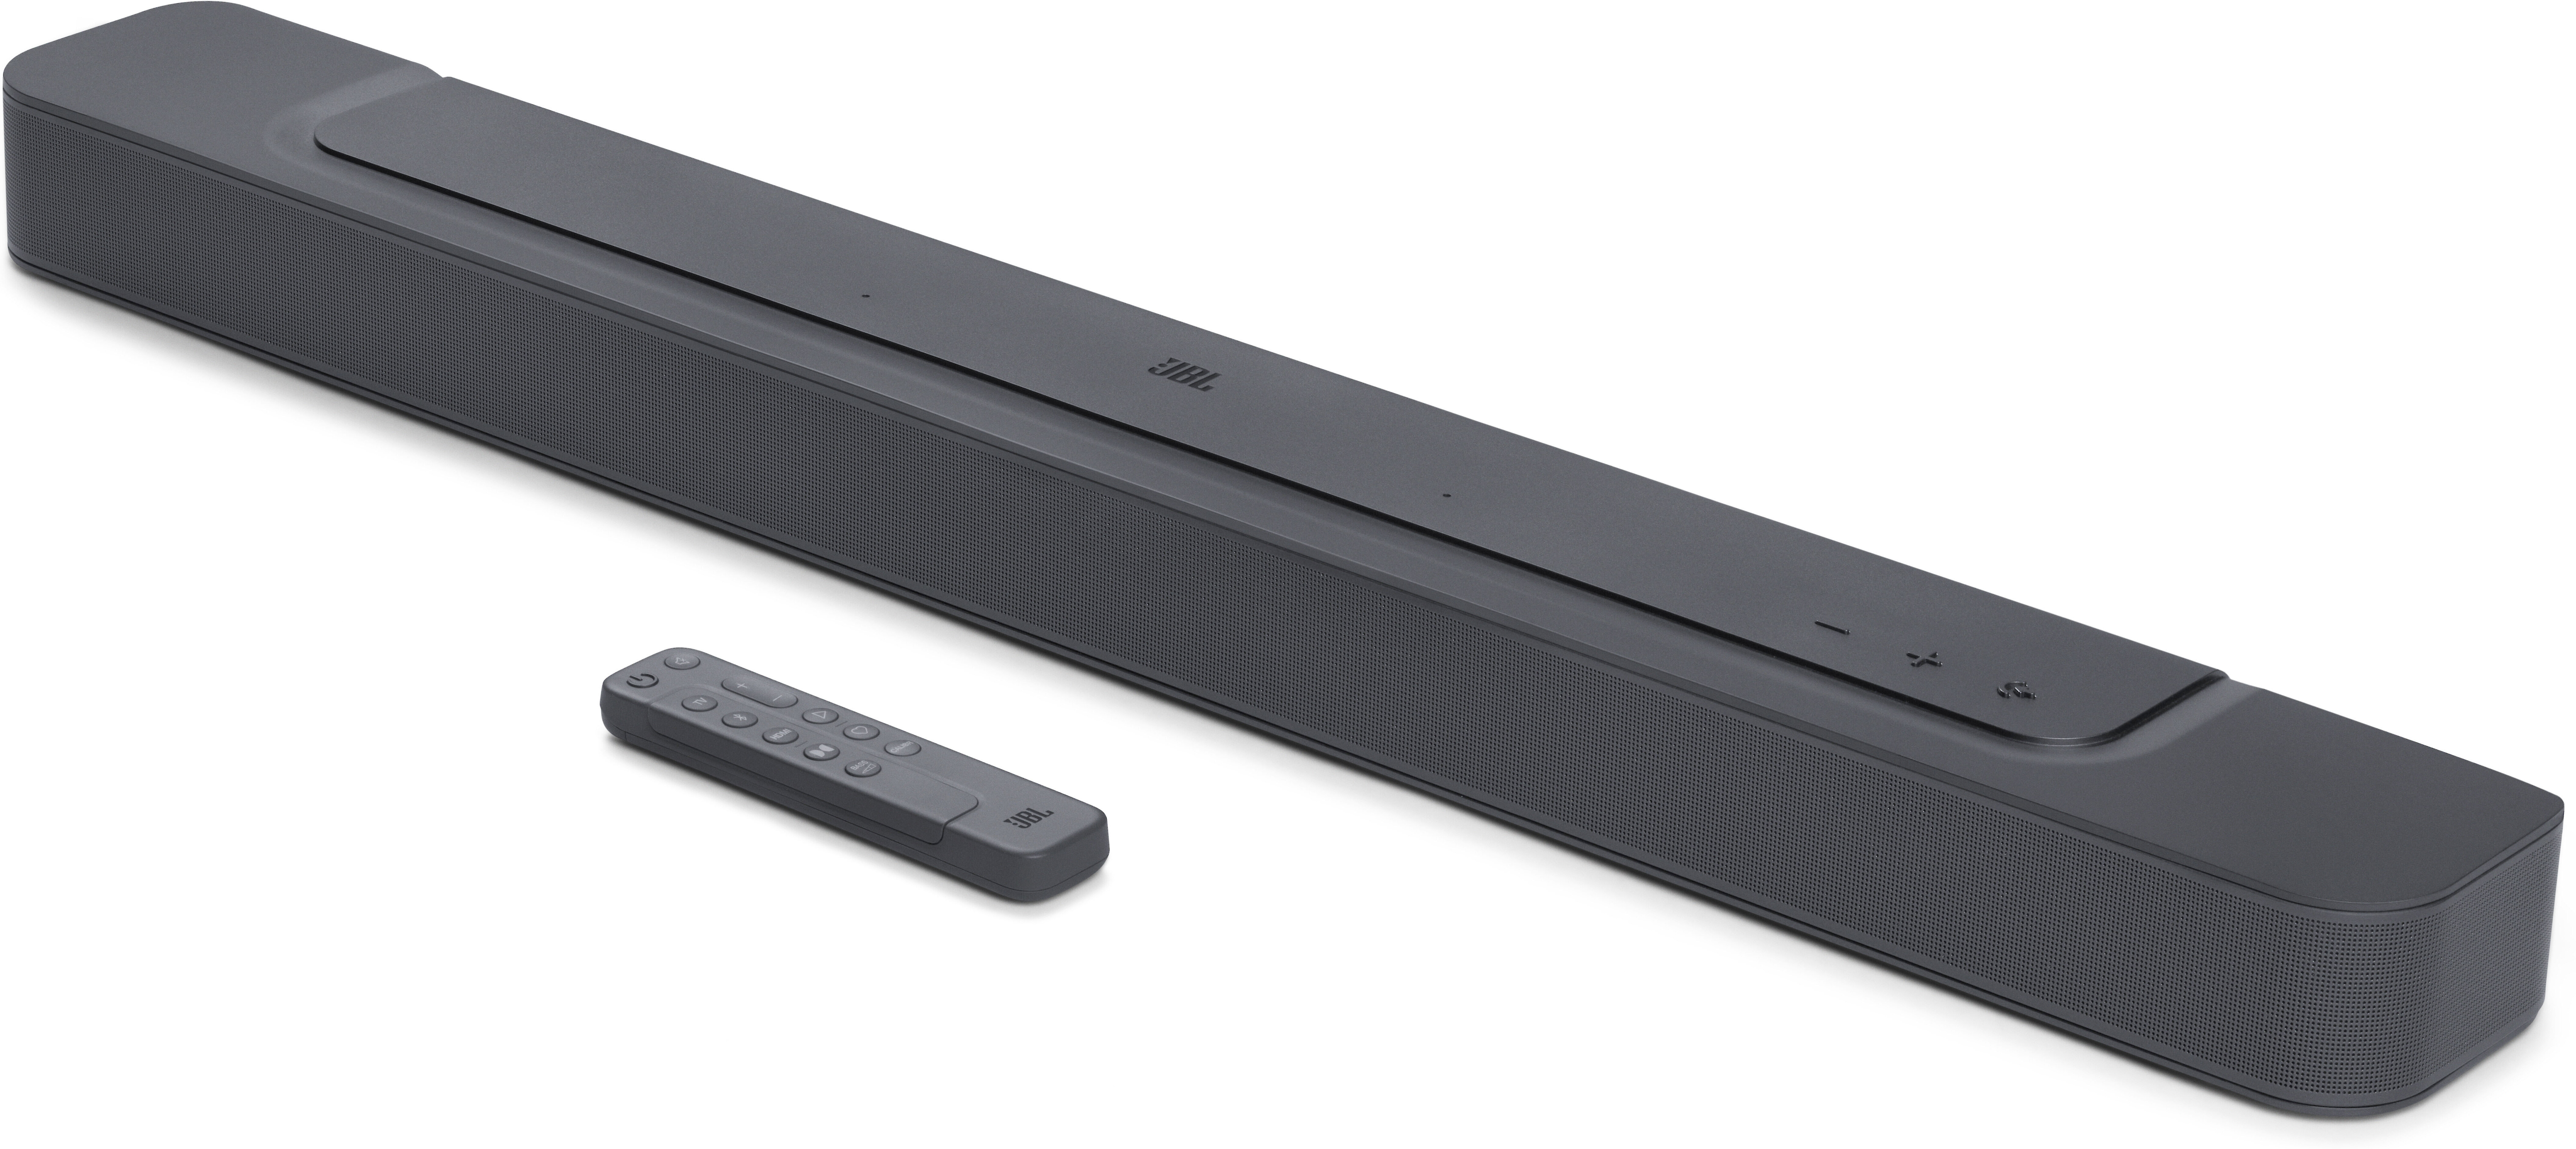 How to shop for the best soundbar for your TV, per experts